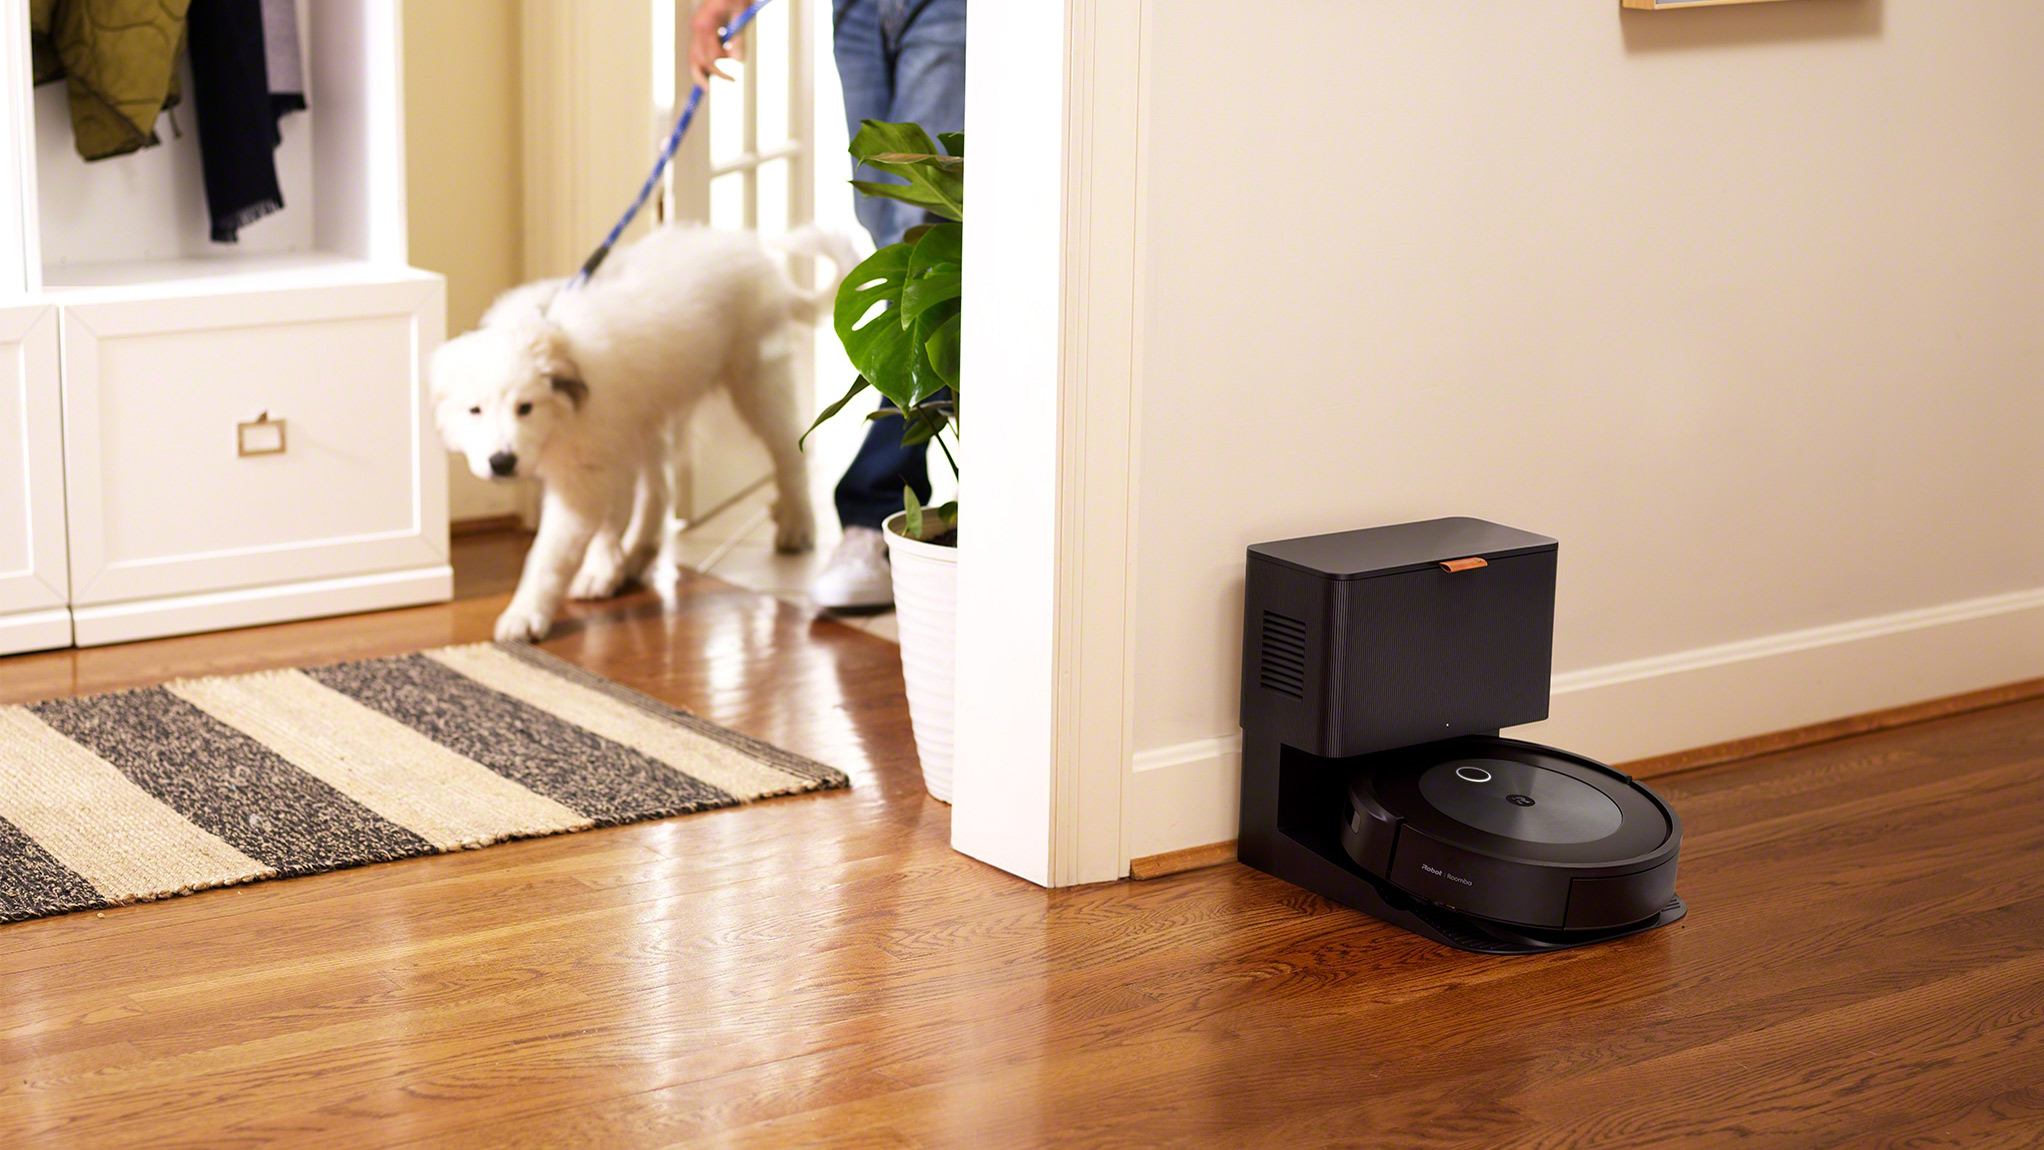 The iRobot Roomba J7+ on its charging station in a hallway while a man with a dog enters the room